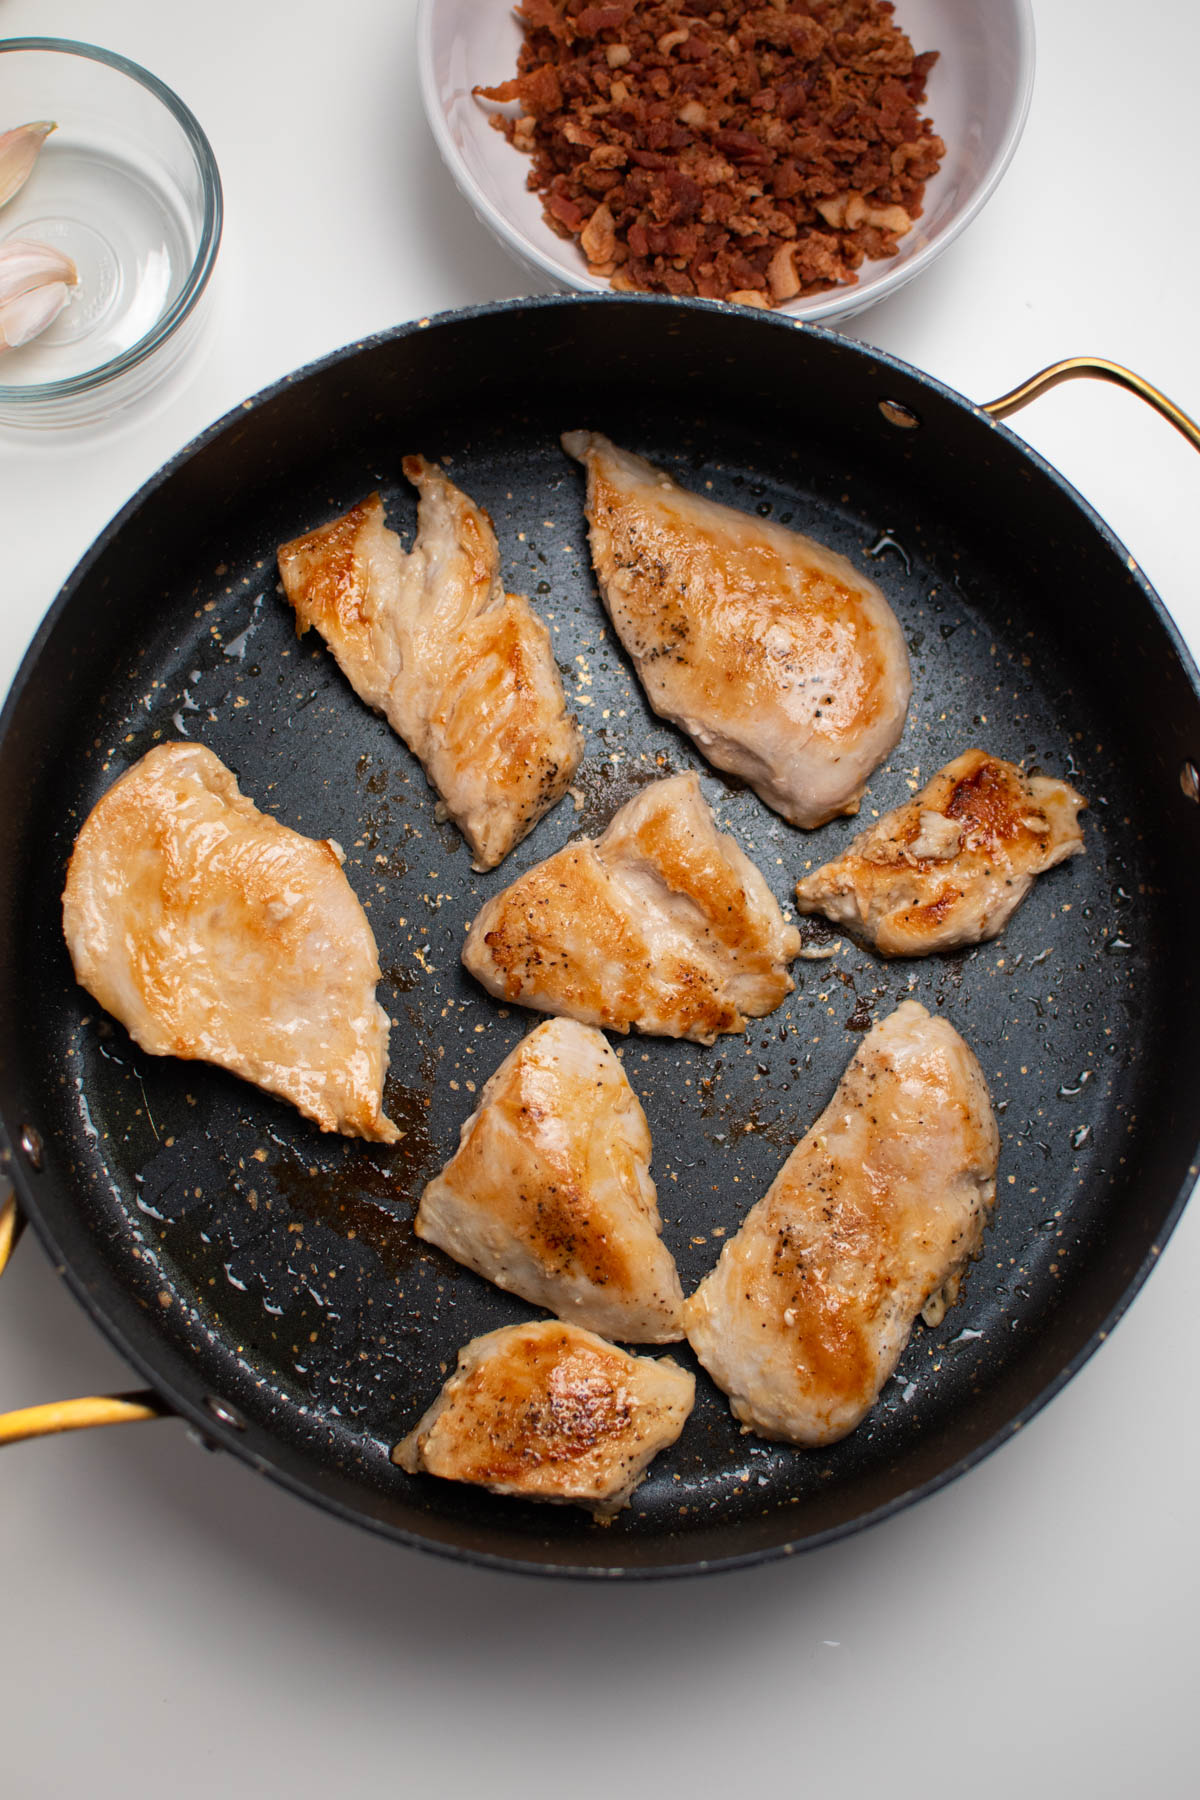 Several cooked chicken pieces in black skillet with bowls of other ingredients nearby.